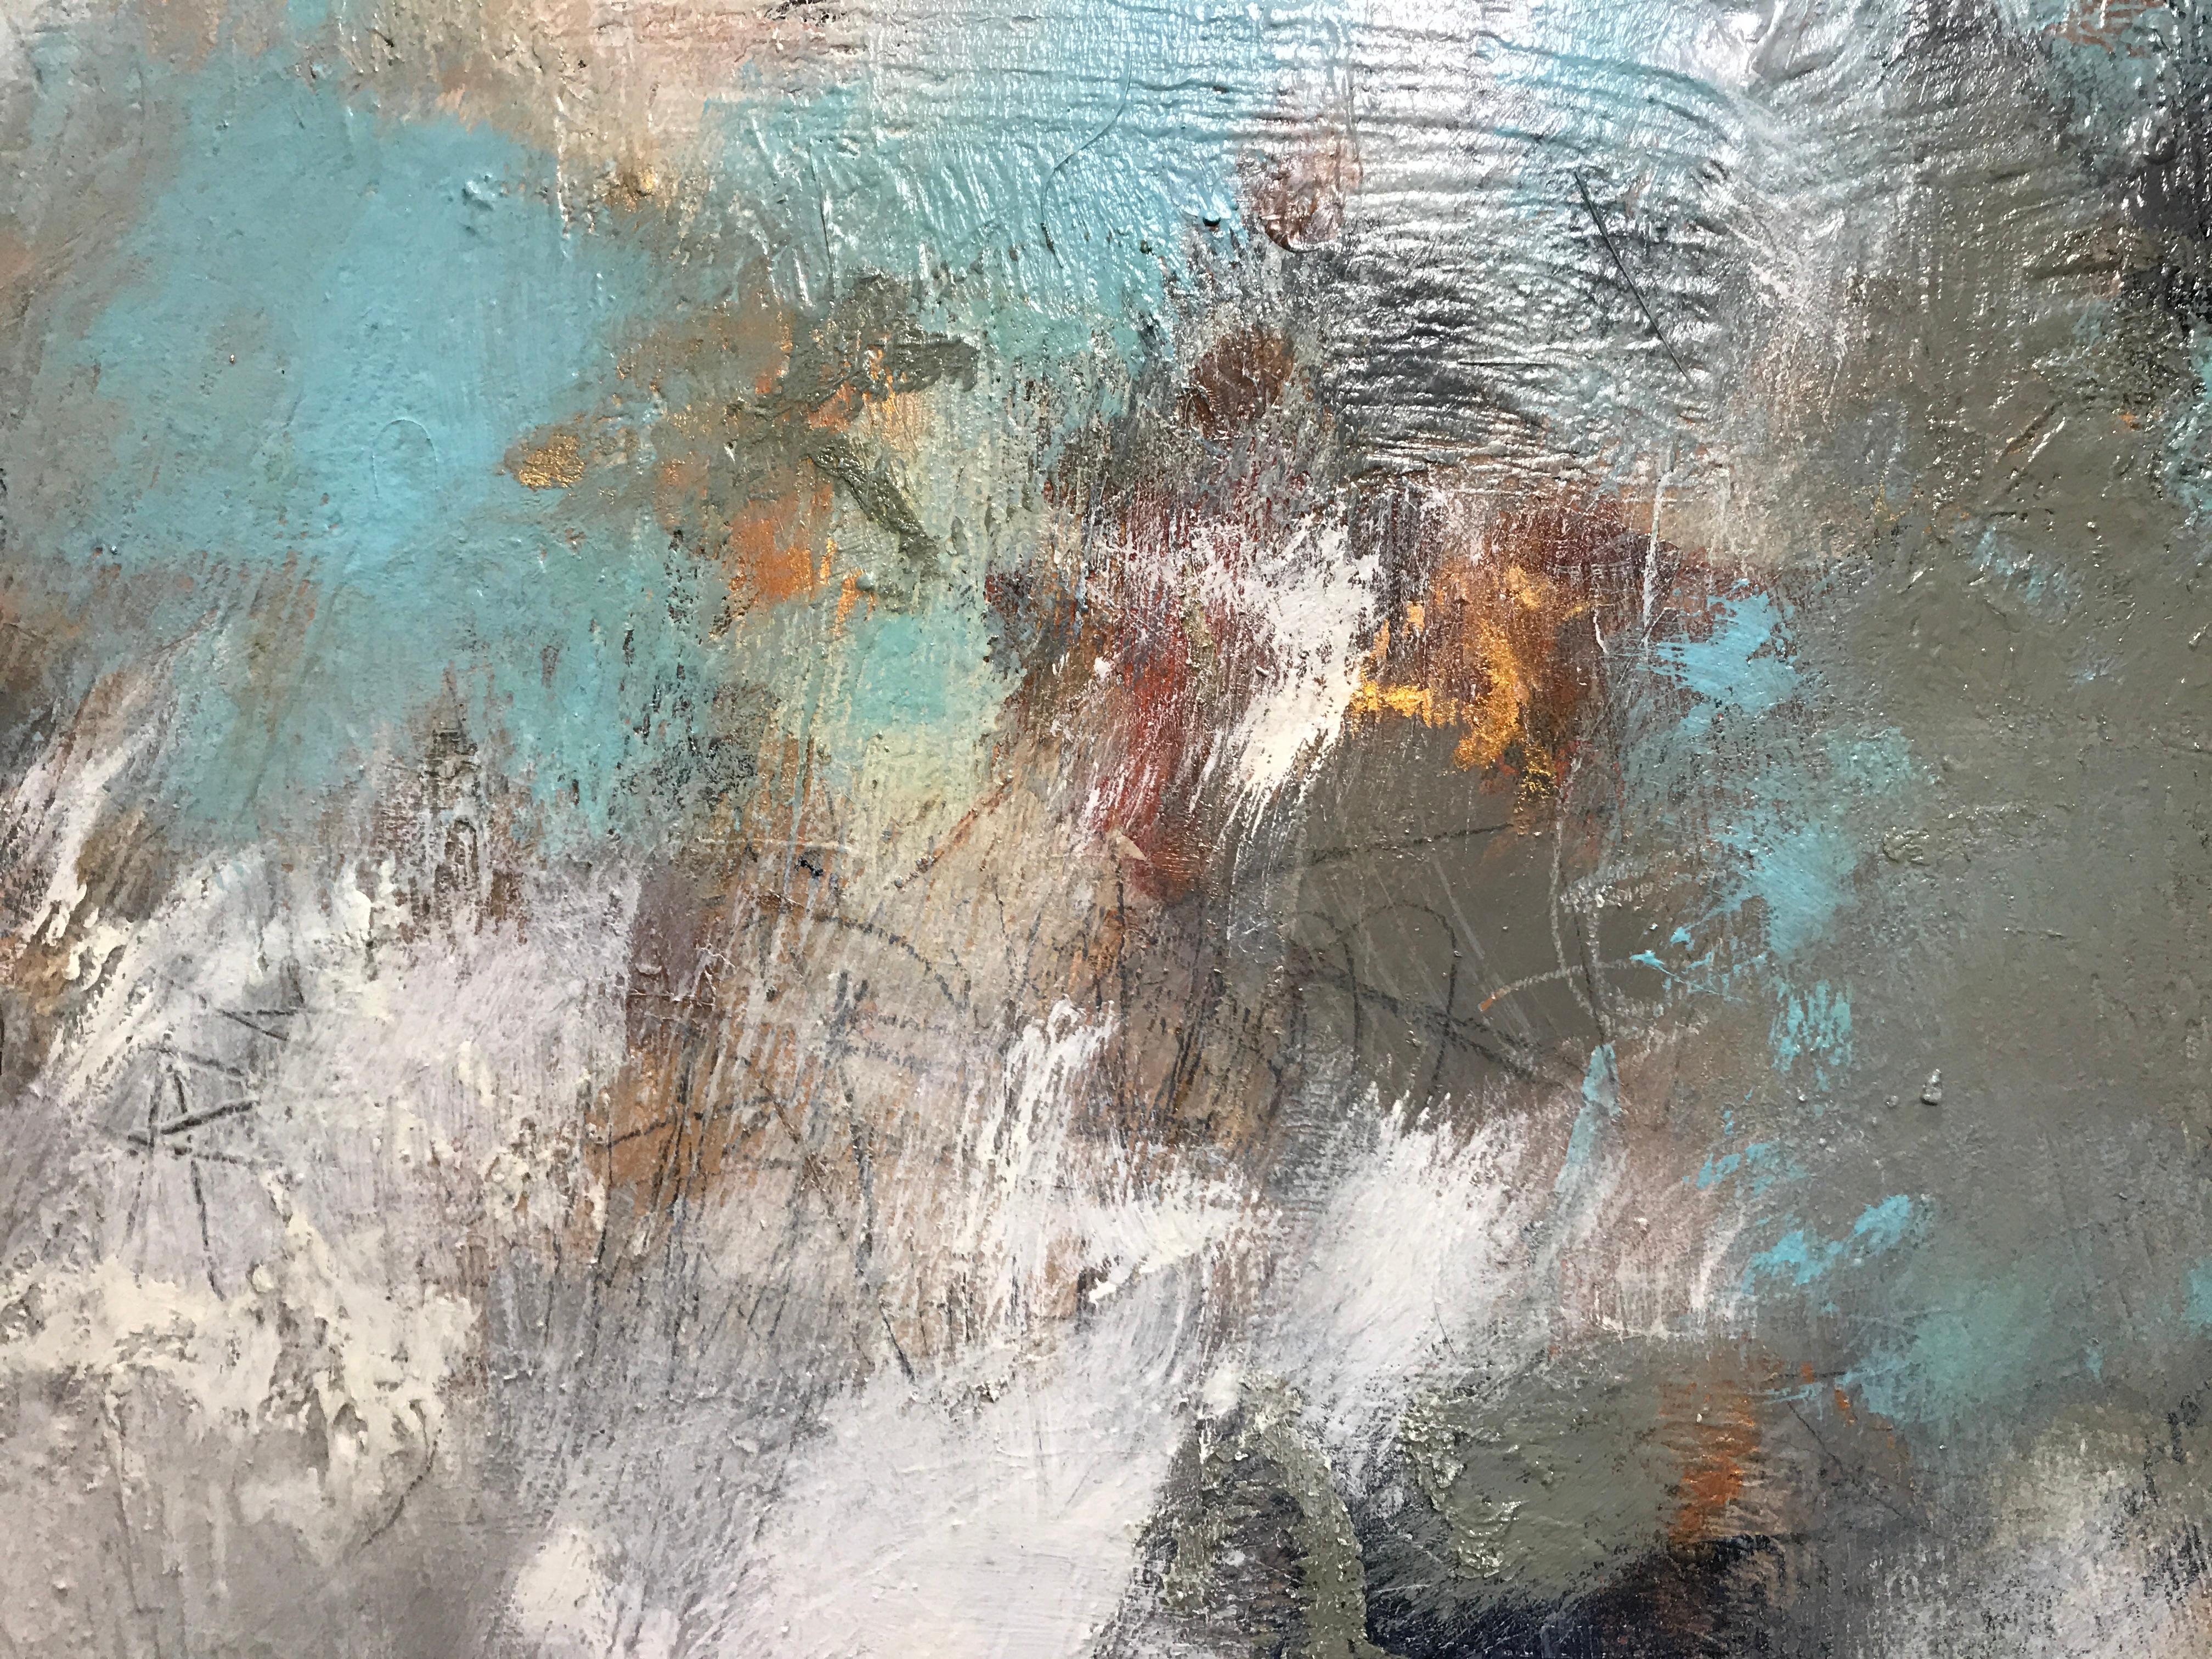 Softly Into the Light, Christina Doelling 2018 Abstract Mixed Media Painting 5